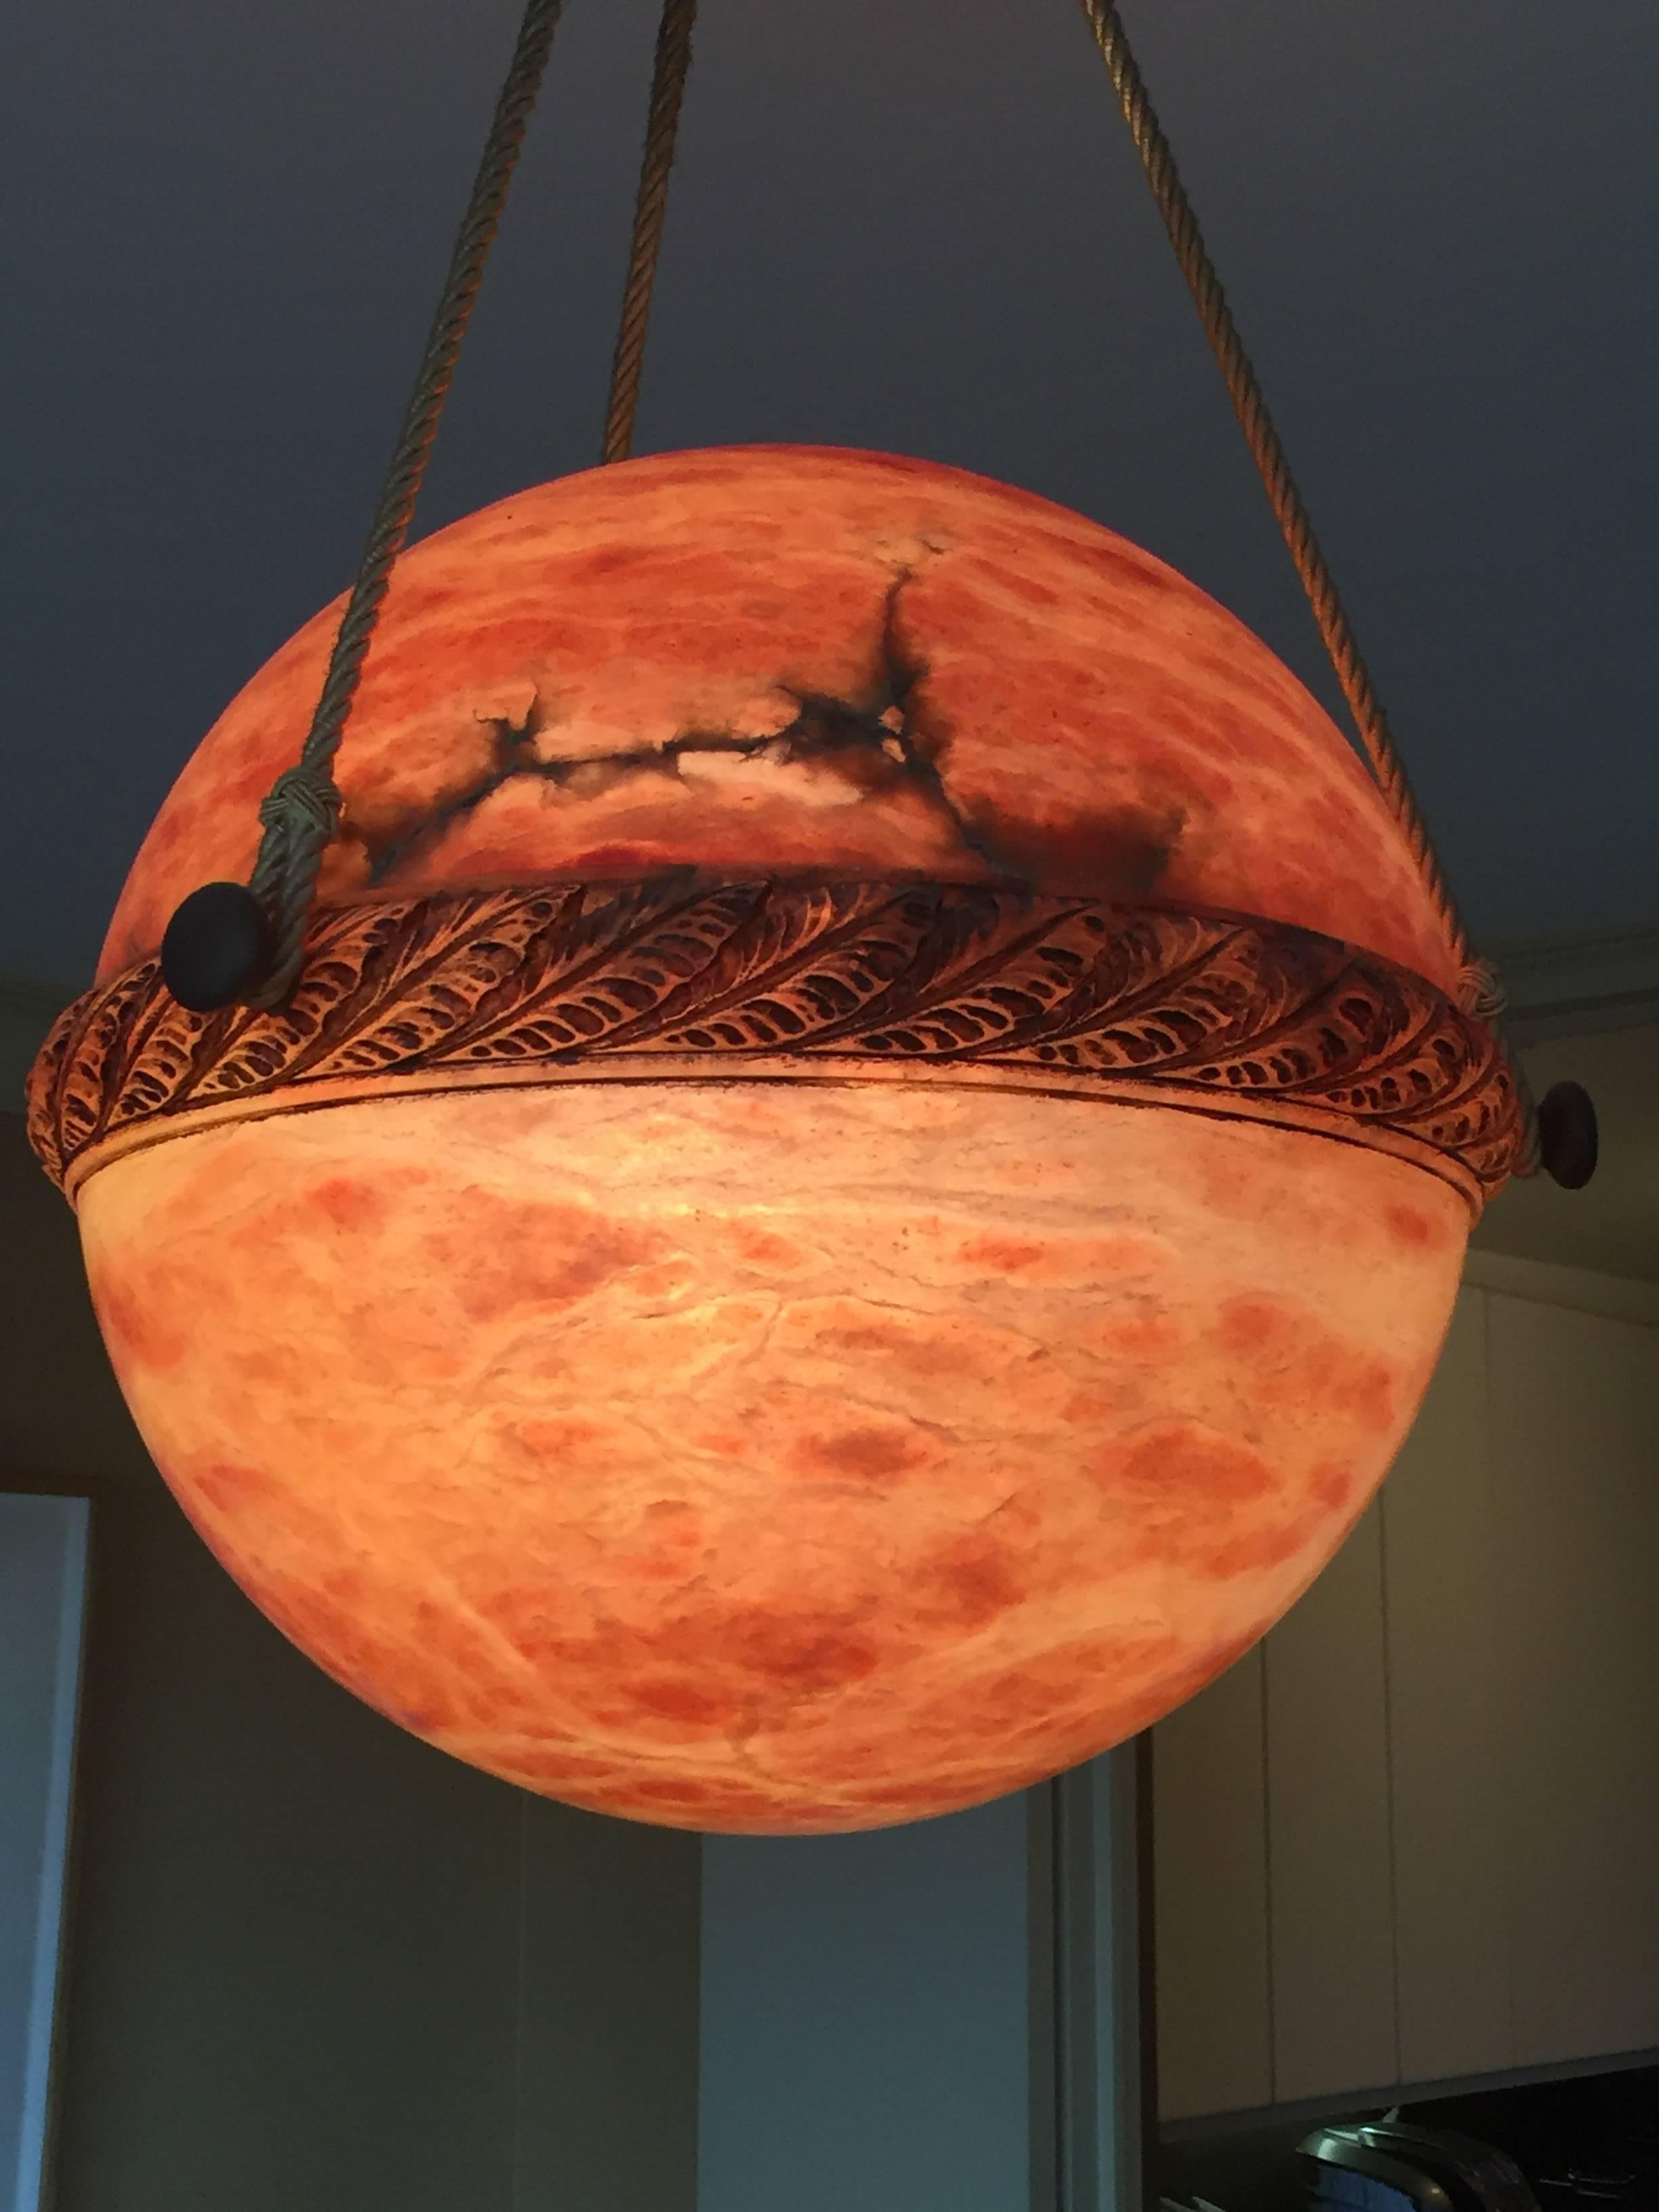 Antique 1920s style amber colored alabaster chandelier.
Matching alabaster ceiling cap with silk covered cording for the suspension.
Handcrafted in Sweden with handsome carving and simple details.